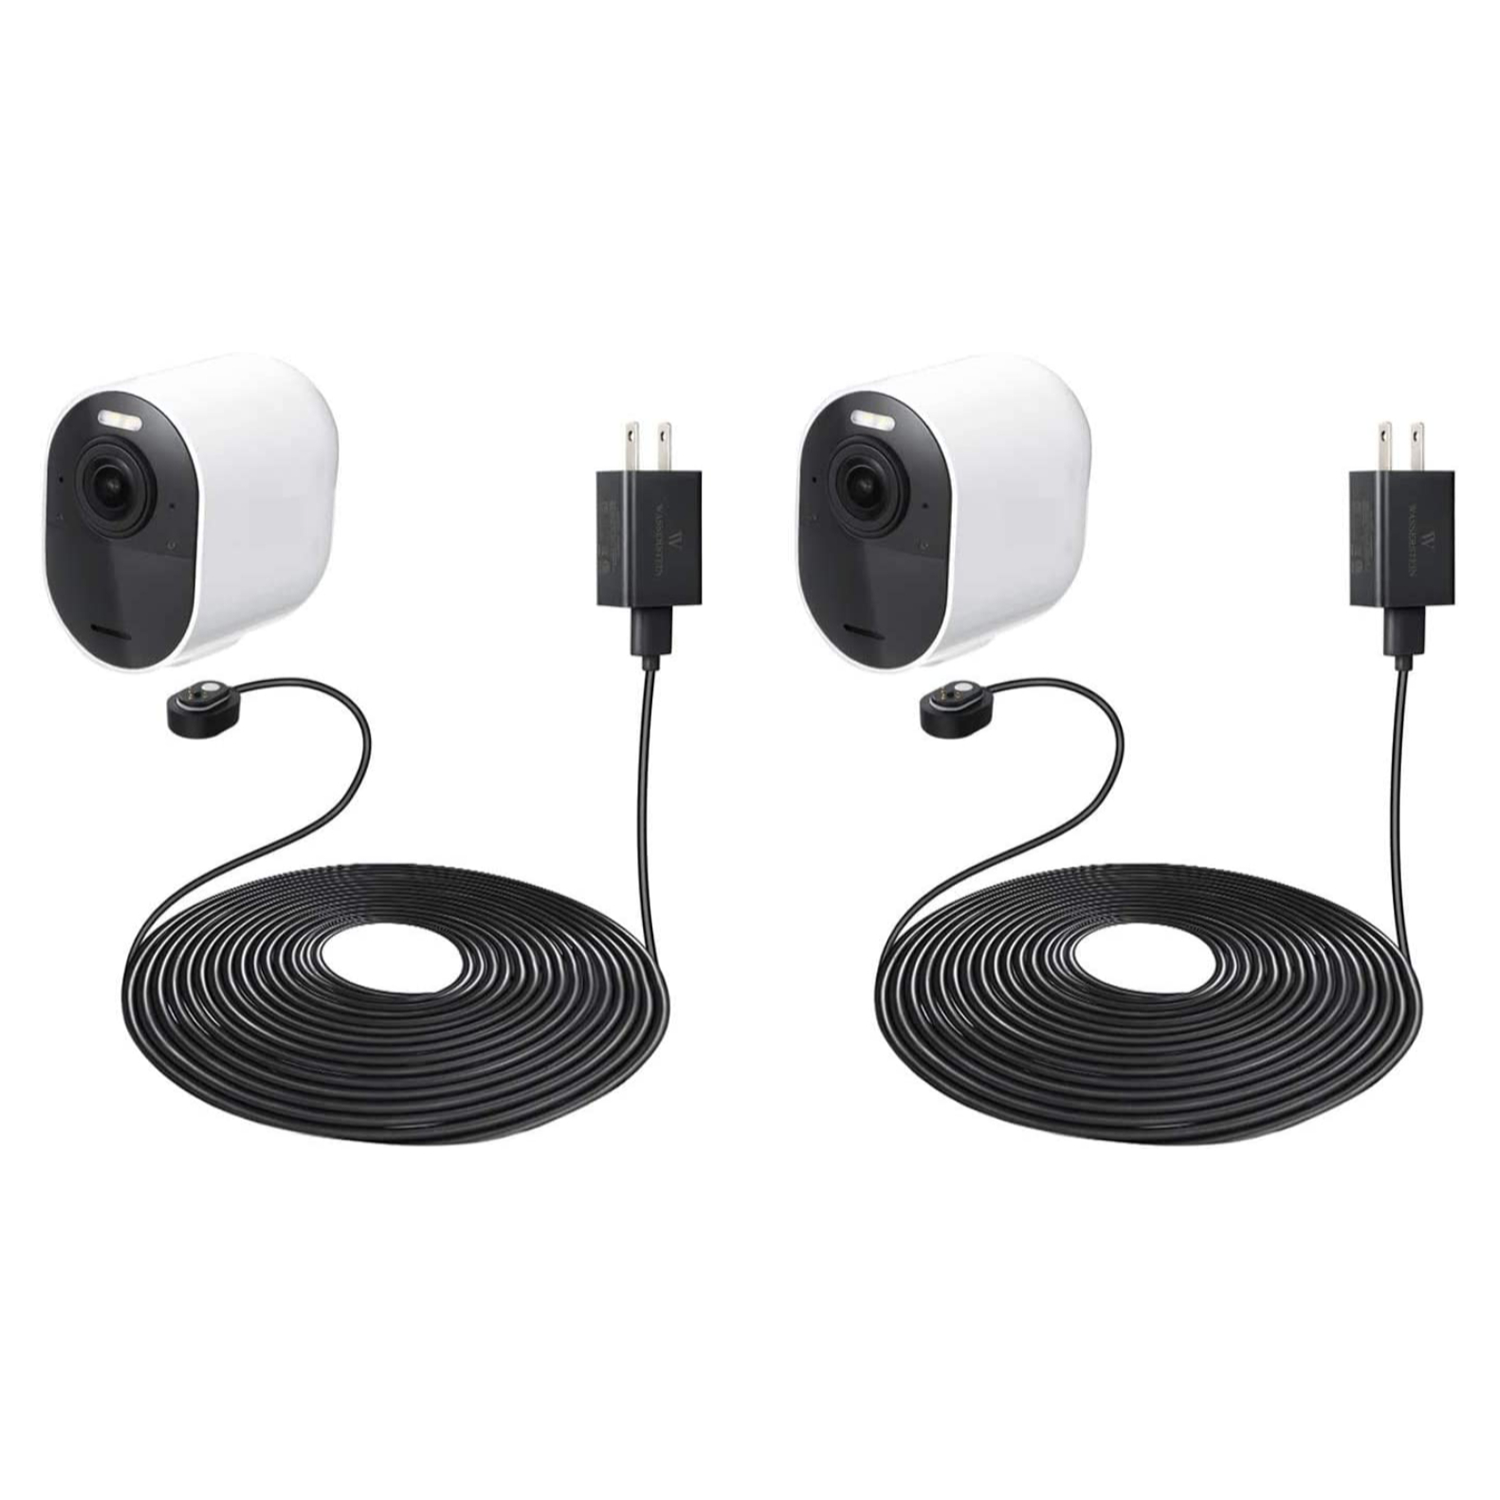 Arlo and Pro 3/4 25ft Cable Black Accessory Kit (2-Pack) in Security Camera Accessories department at Lowes.com